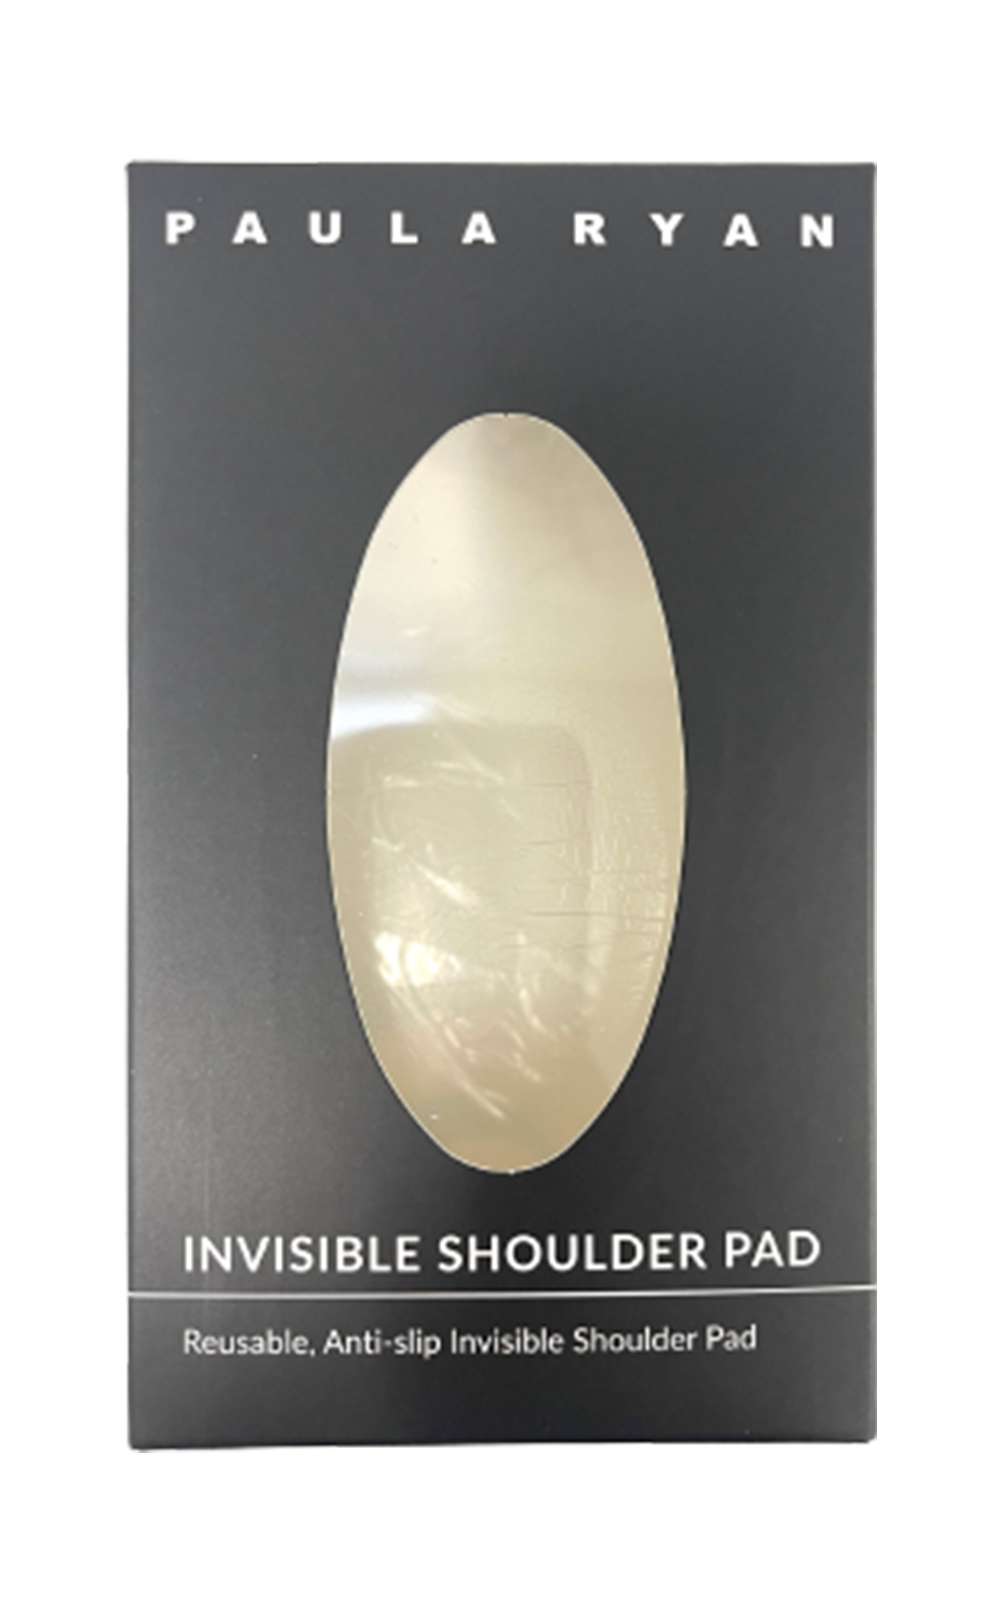 Invisible Shoulder Pad product photo.